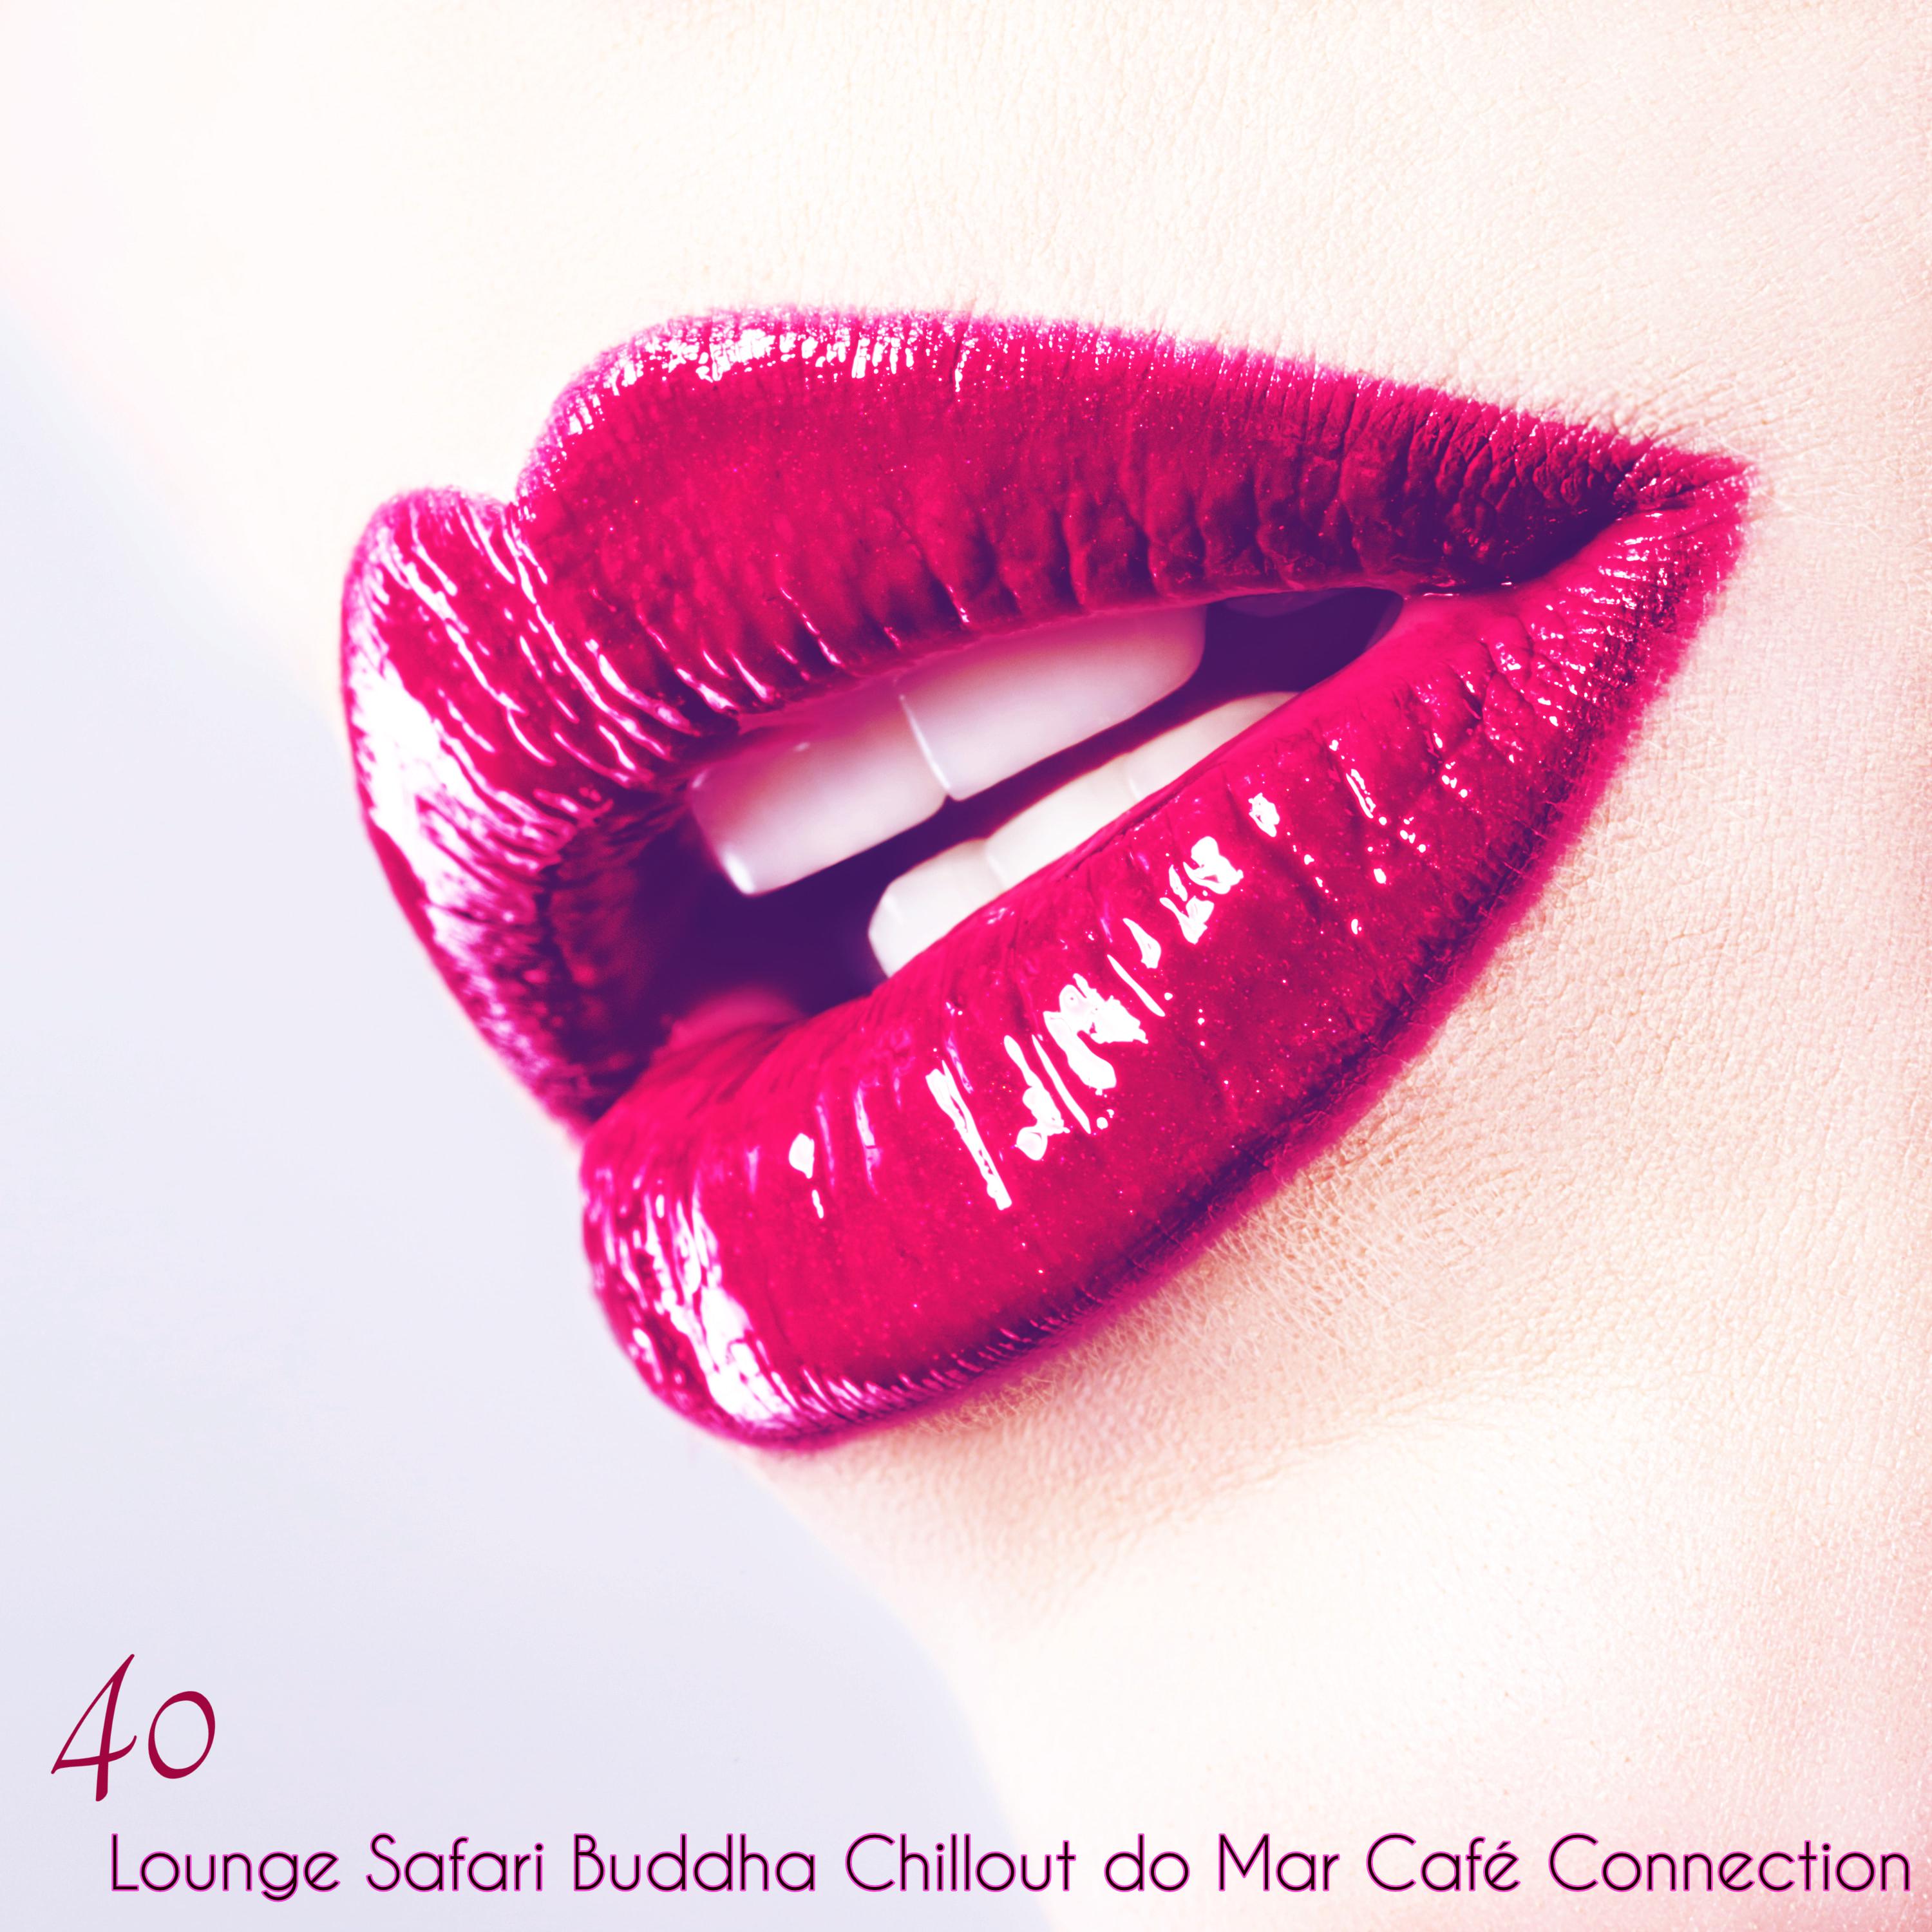 40 Lounge Safari Buddha Chillout do Mar Café Connection – **** Chill Lounge Electronic Ambient Songs Selection